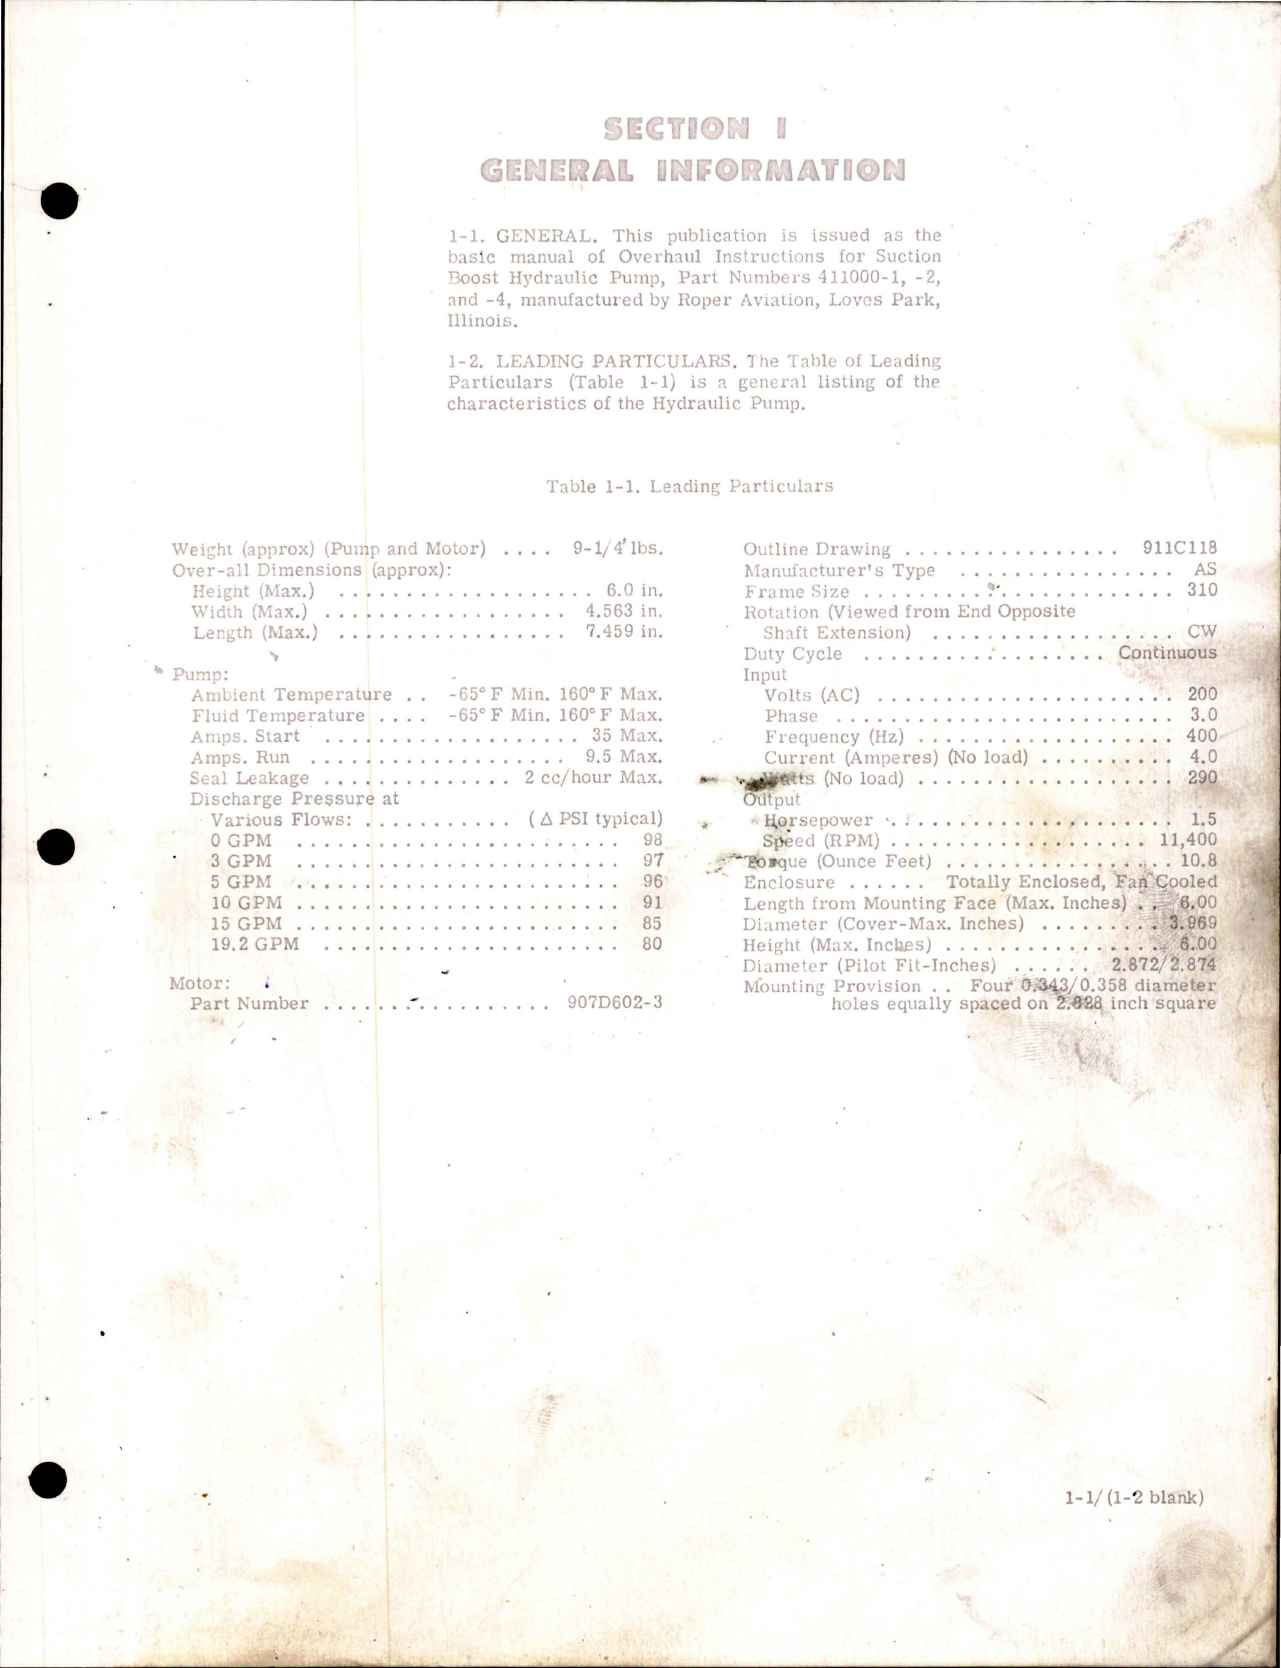 Sample page 9 from AirCorps Library document: Overhaul Instructions with Illustrated Parts Breakdown for Suction Boost Hydraulic Pump - Parts: 411000-1, 411000-2 and 411000-4